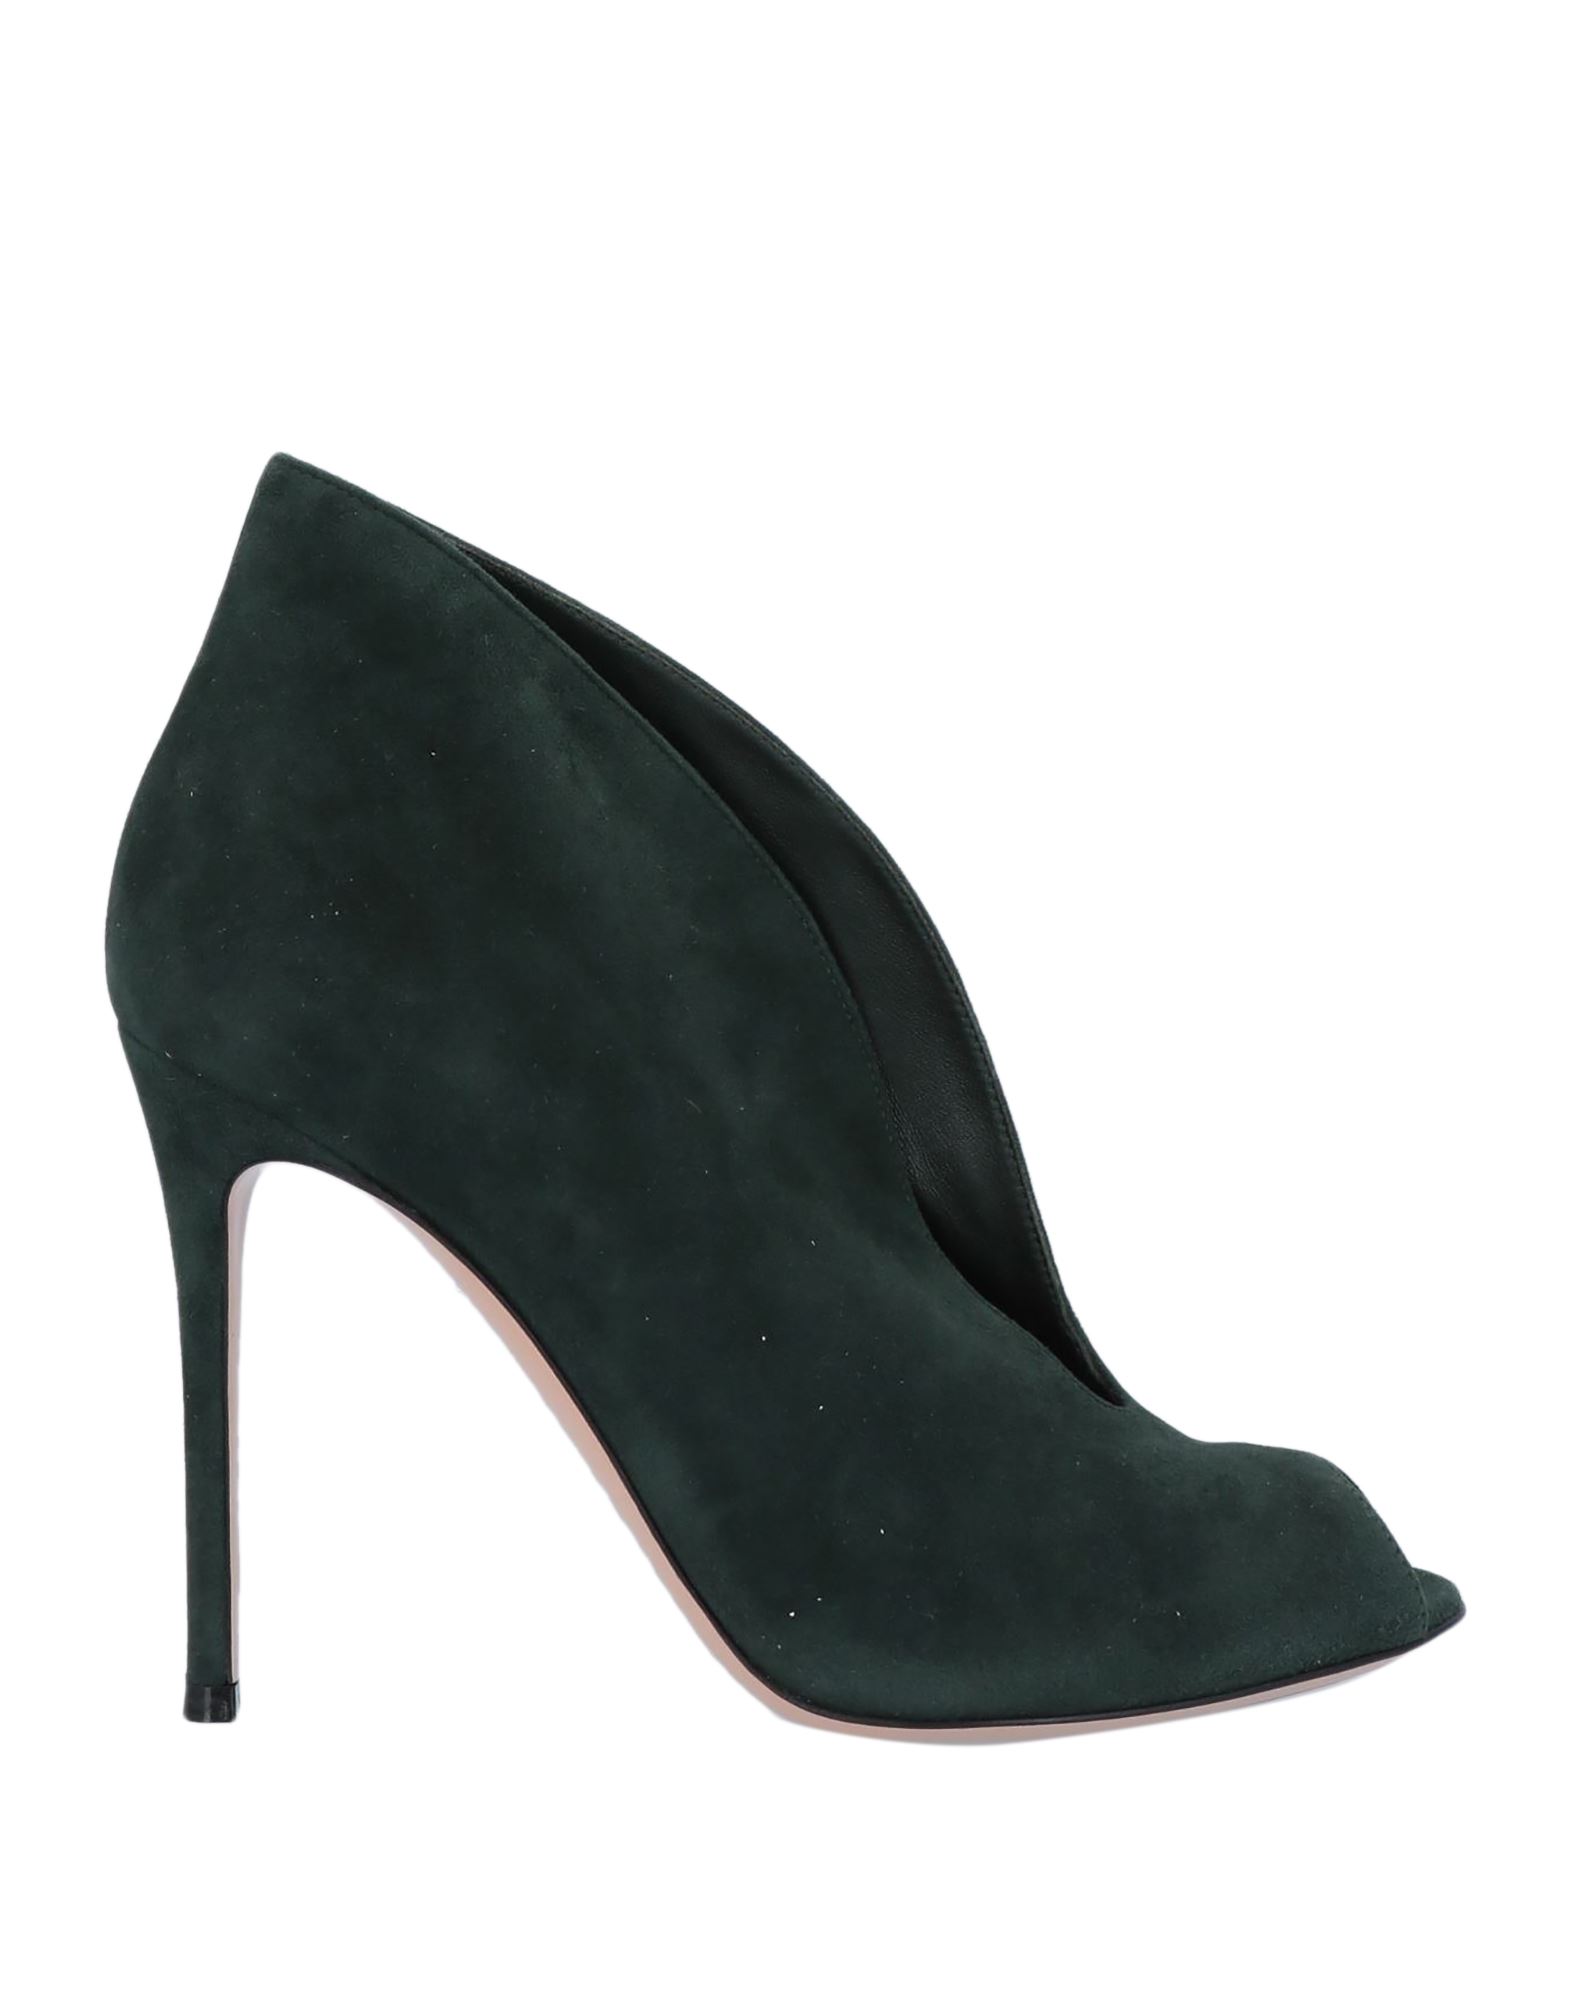 Gianvito Rossi Ankle Boots In Dark Green